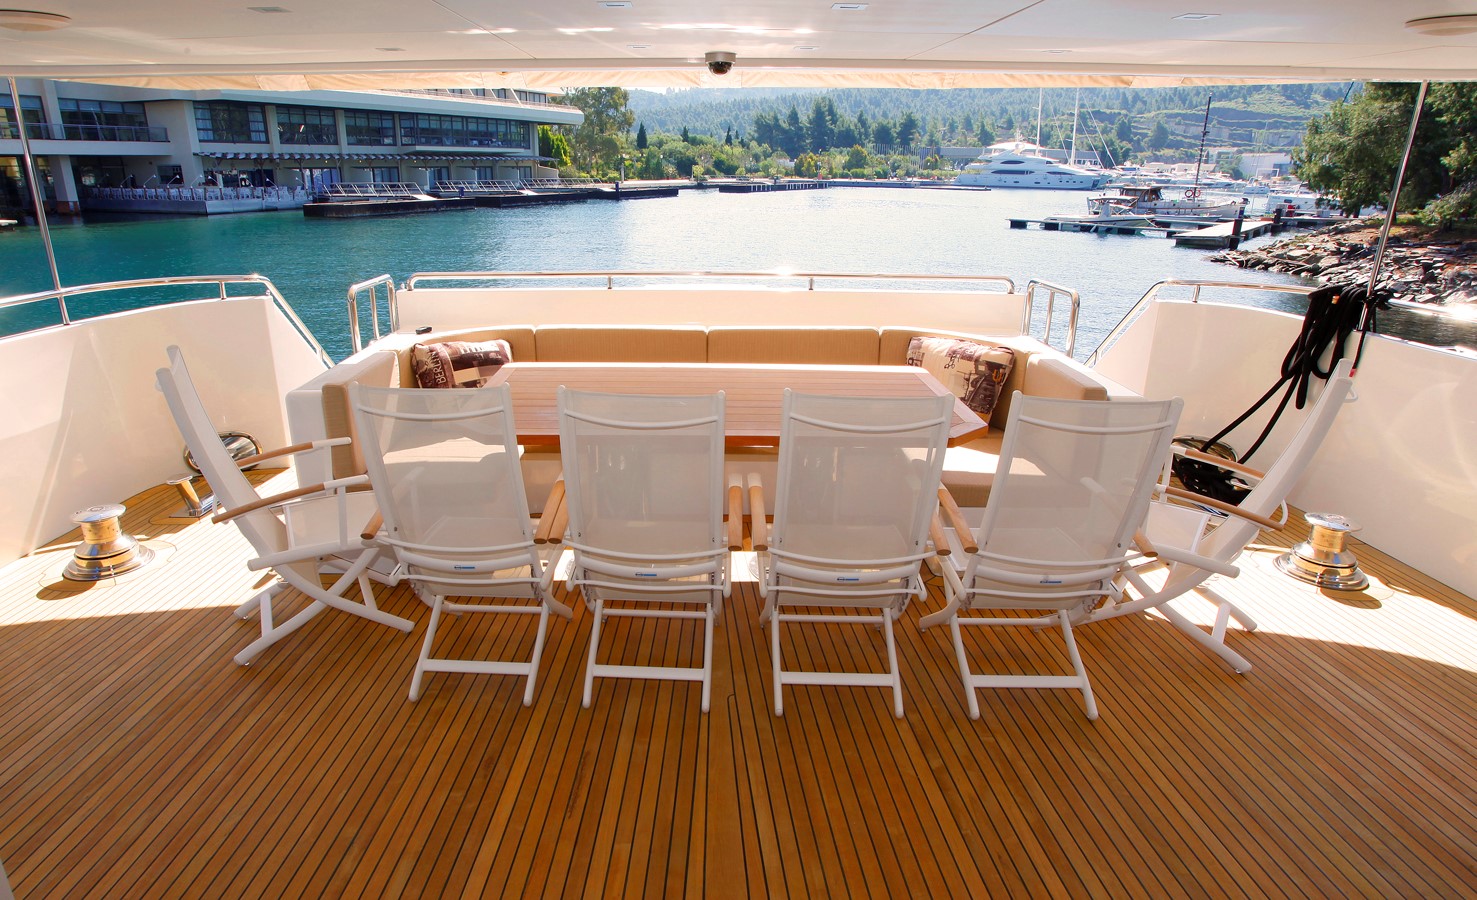 Outdoor dining area Mr. Mouse yacht for sale Yachtzoo